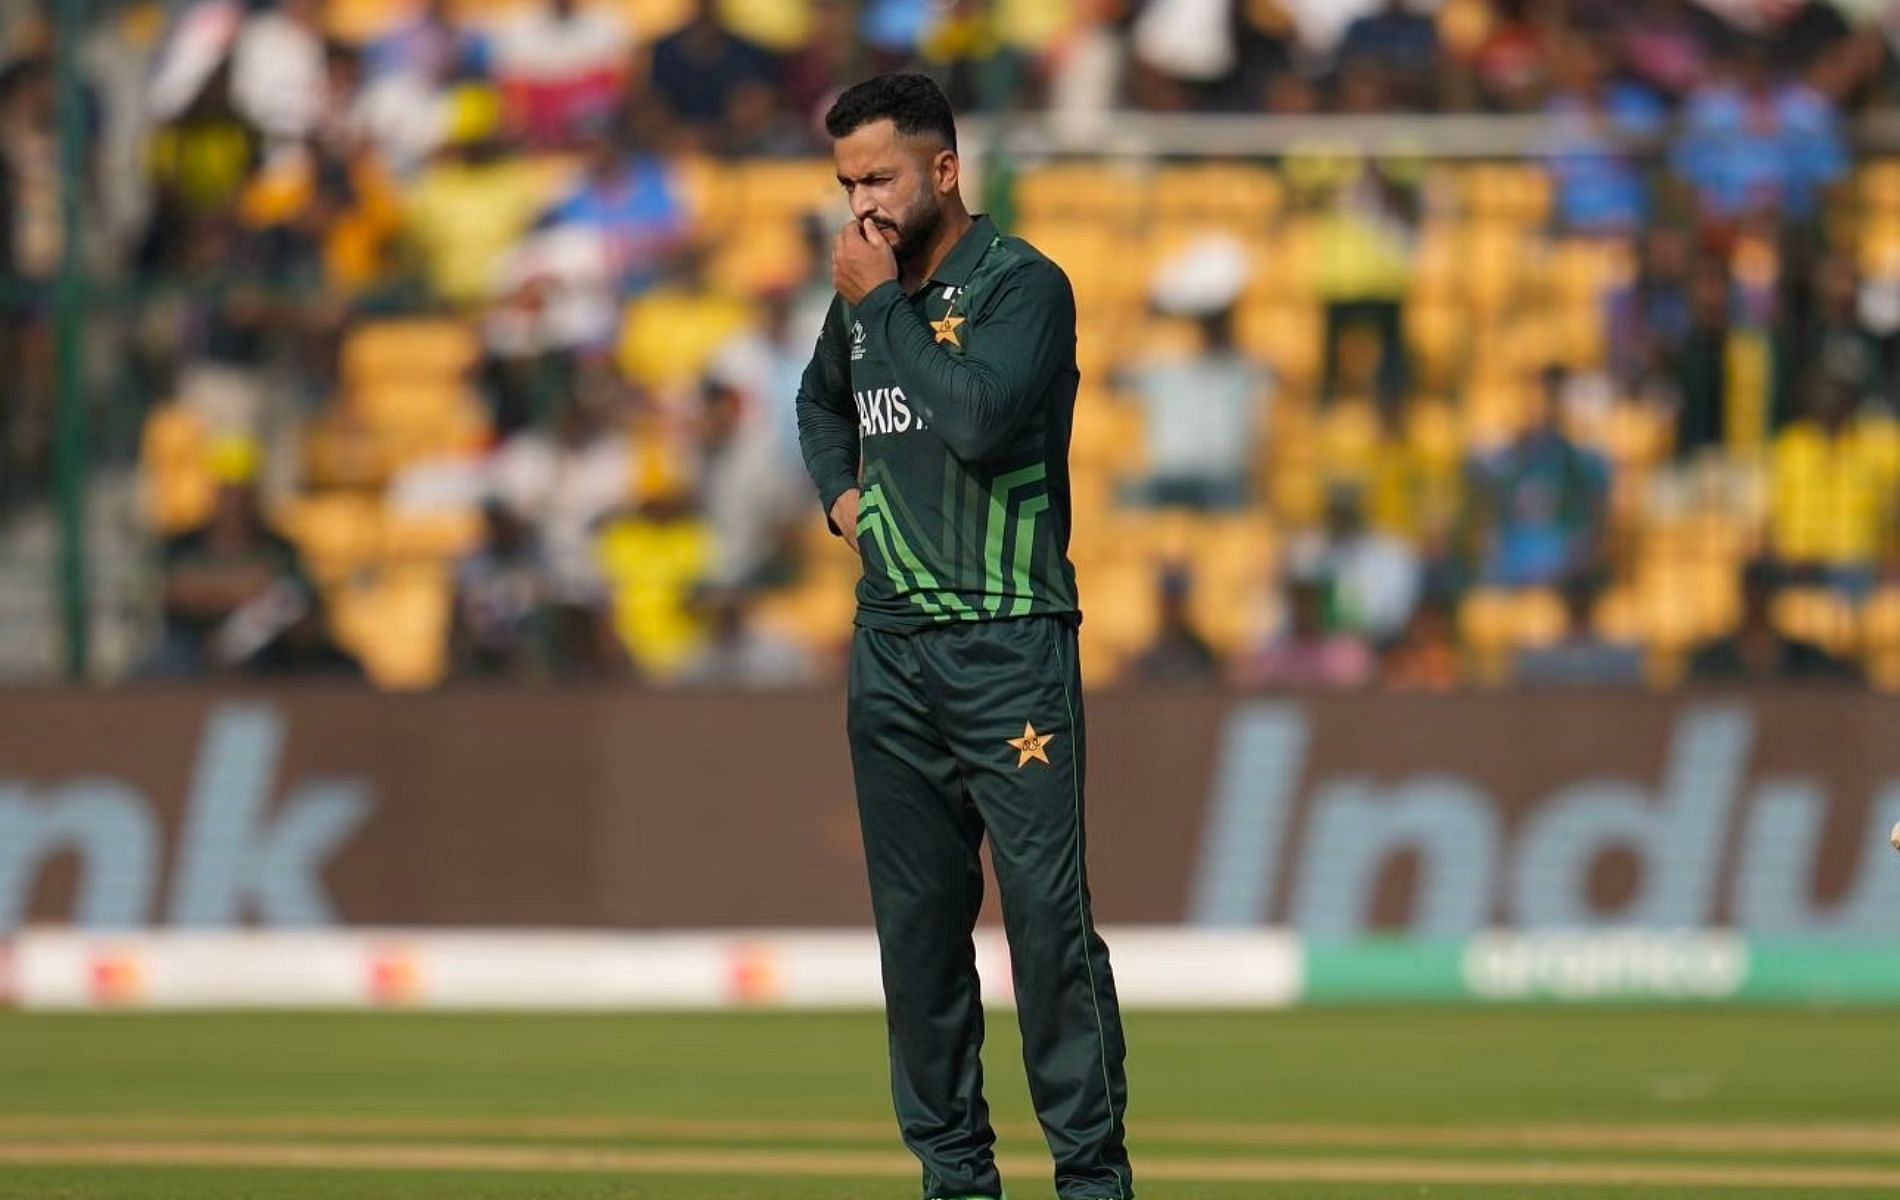 Mohammad Nawaz was criticised by many for his poor ball. (Pic: AP)